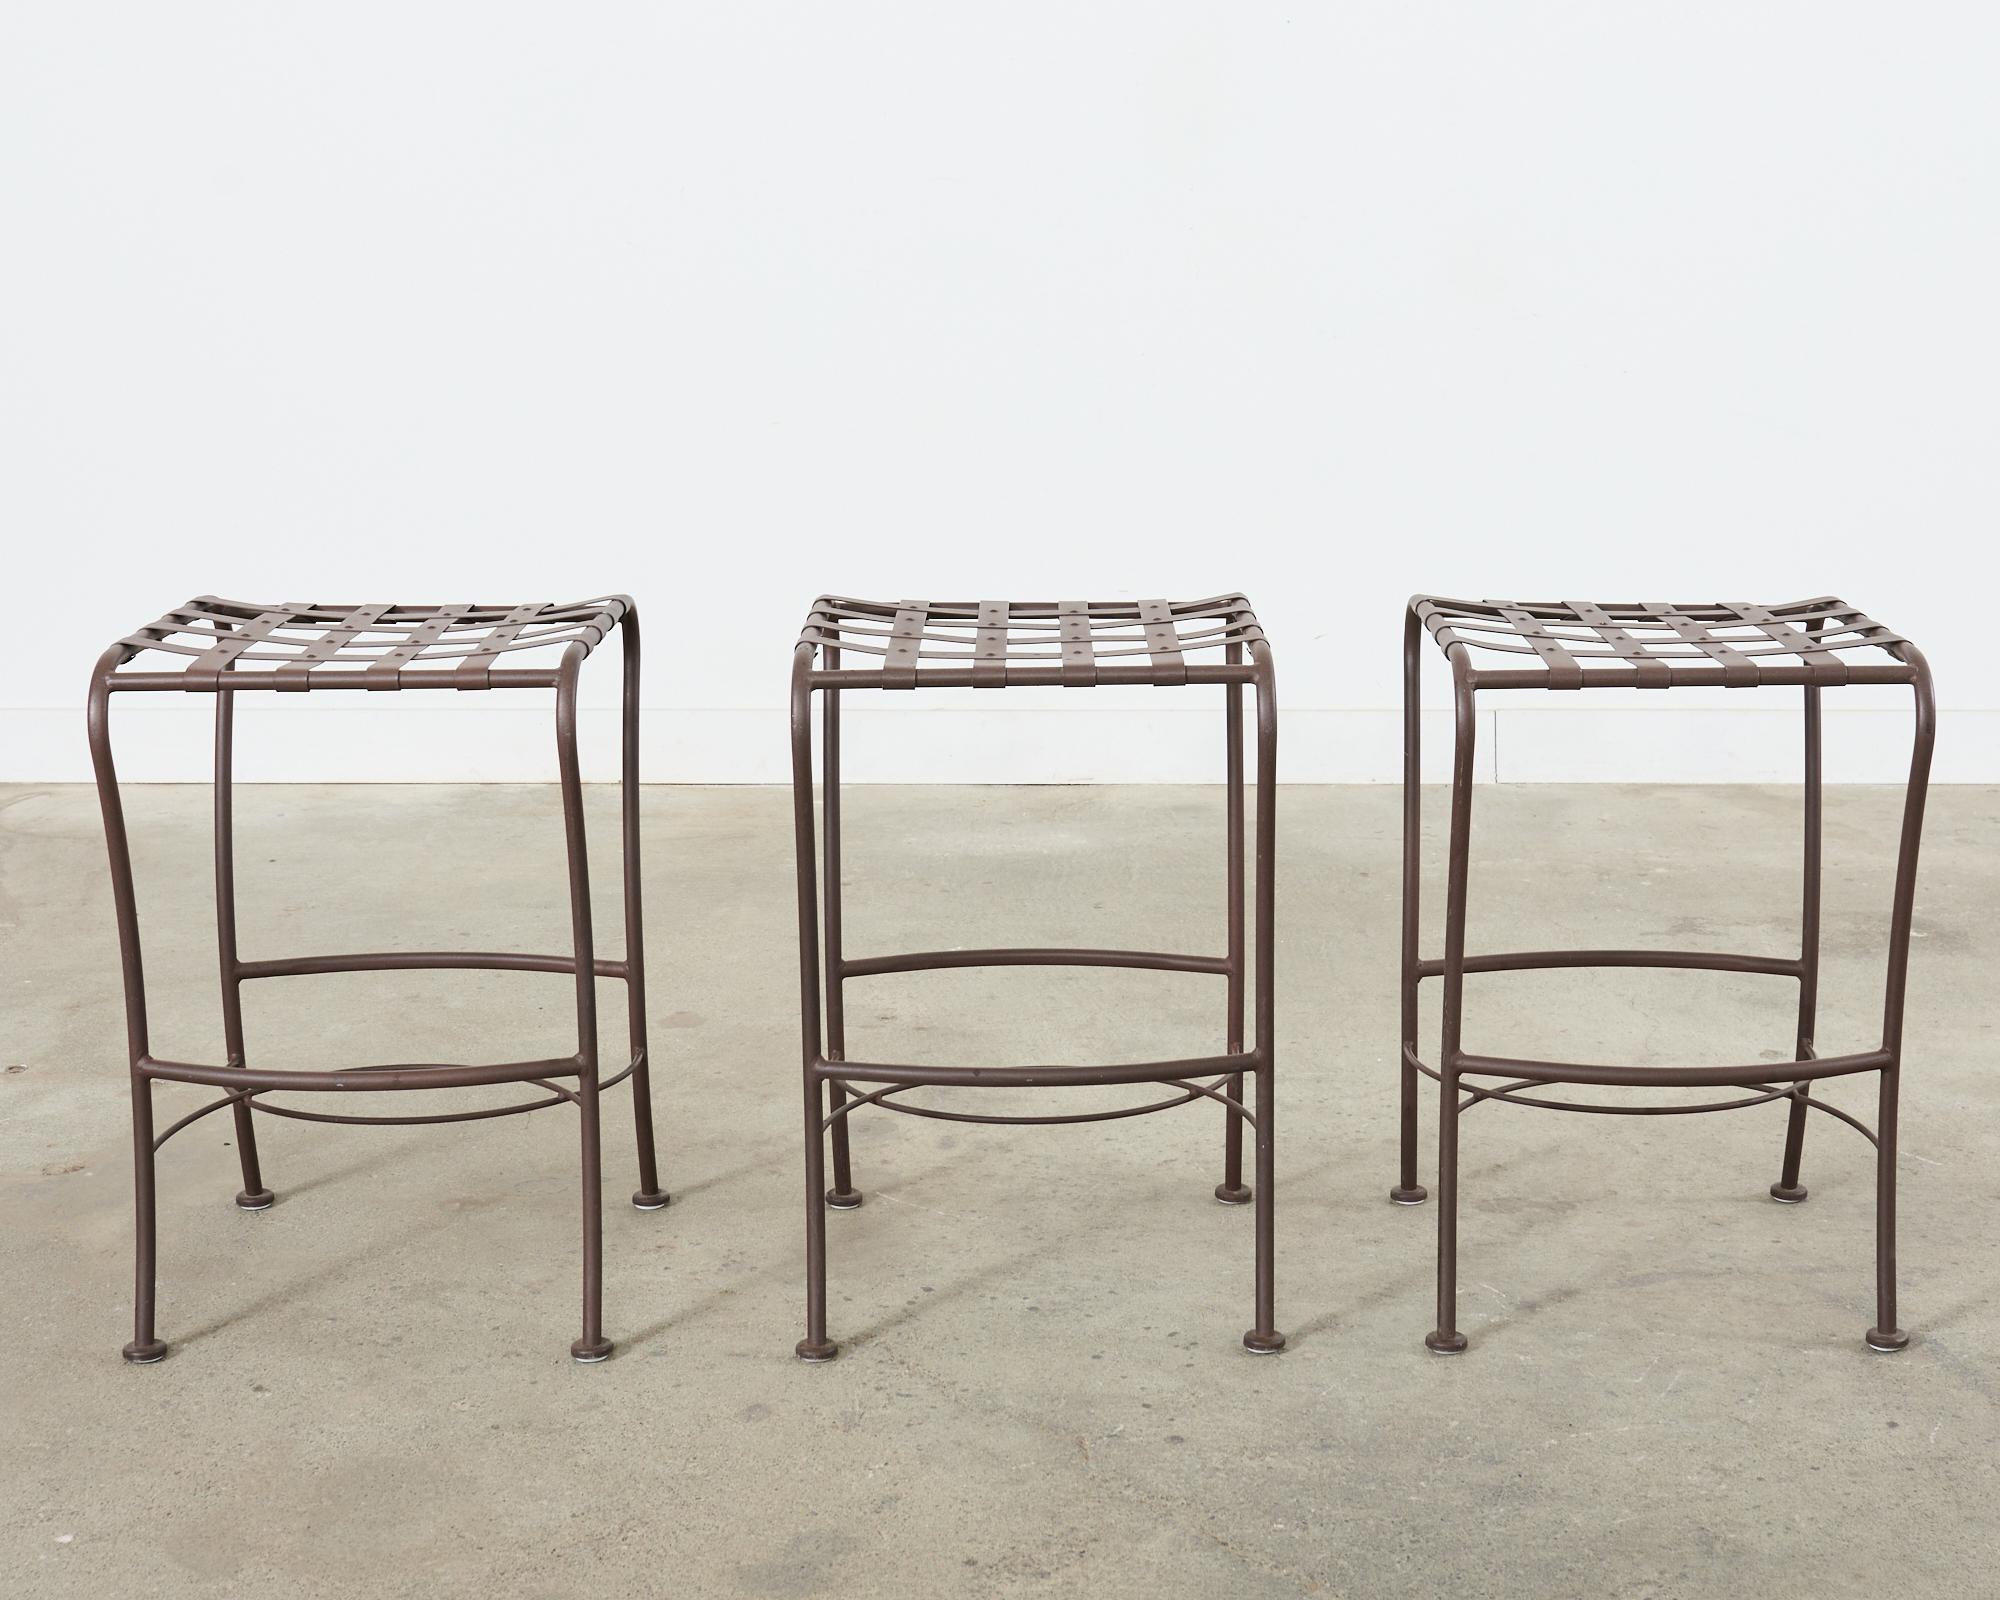 Handsome set of three wrought aluminum barstools featuring a neoclassical style lattice strap seat. Made in the midcentury style of Mario Papperzini and John Salterini. The aluminum has a powder-coated finish in a patinated metal tone to mimic aged